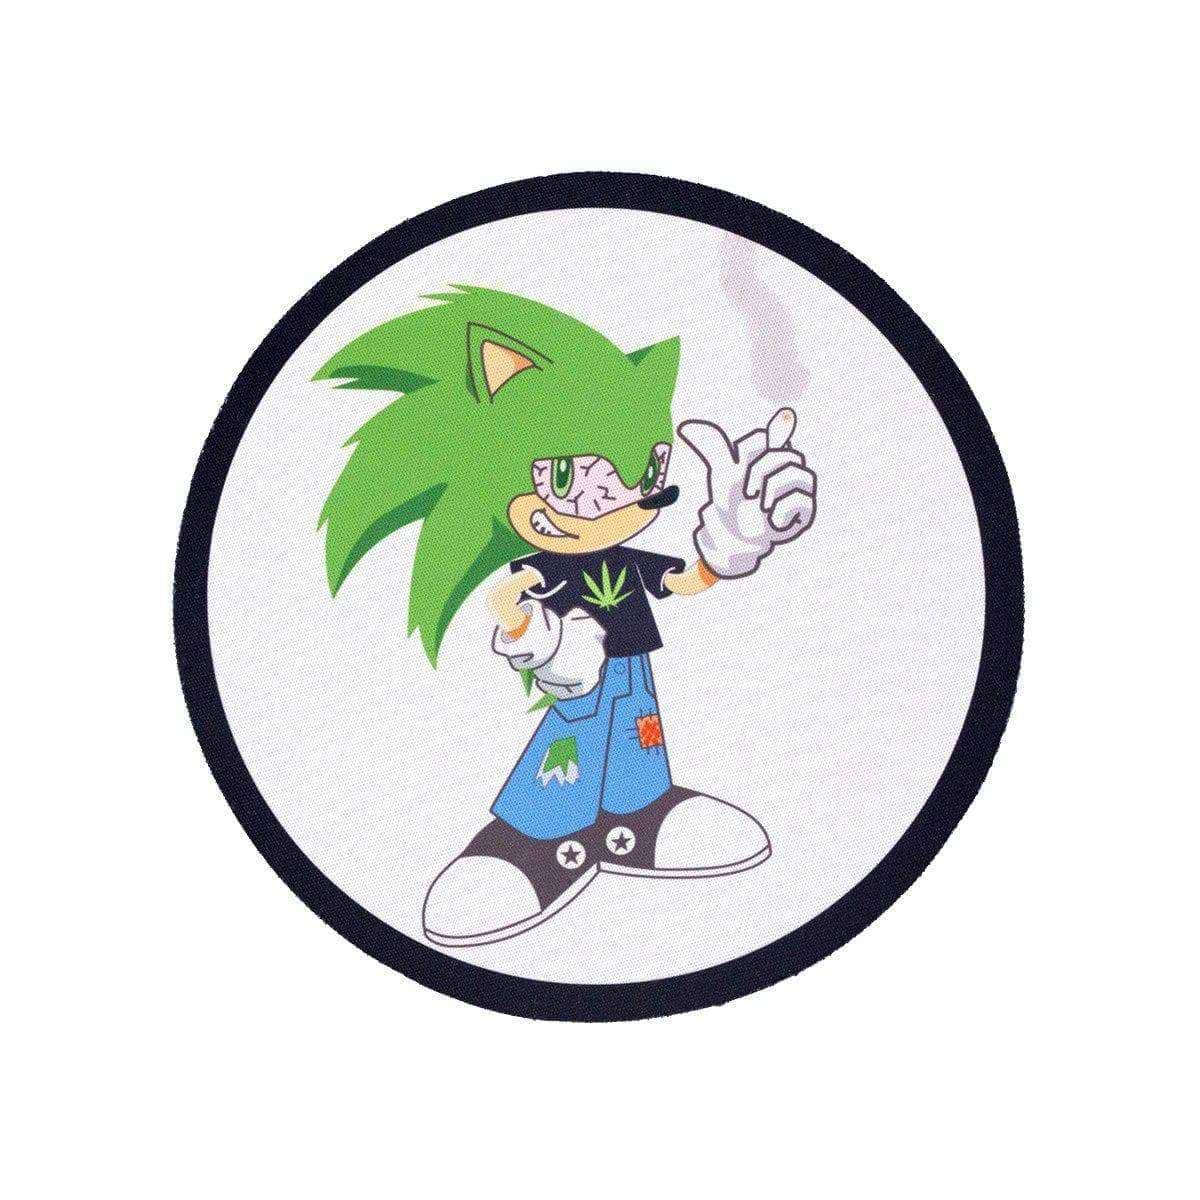 Fun round cartoon-inspired bong coaster smoking accessory with Sonic Boom holding a weed leaf design